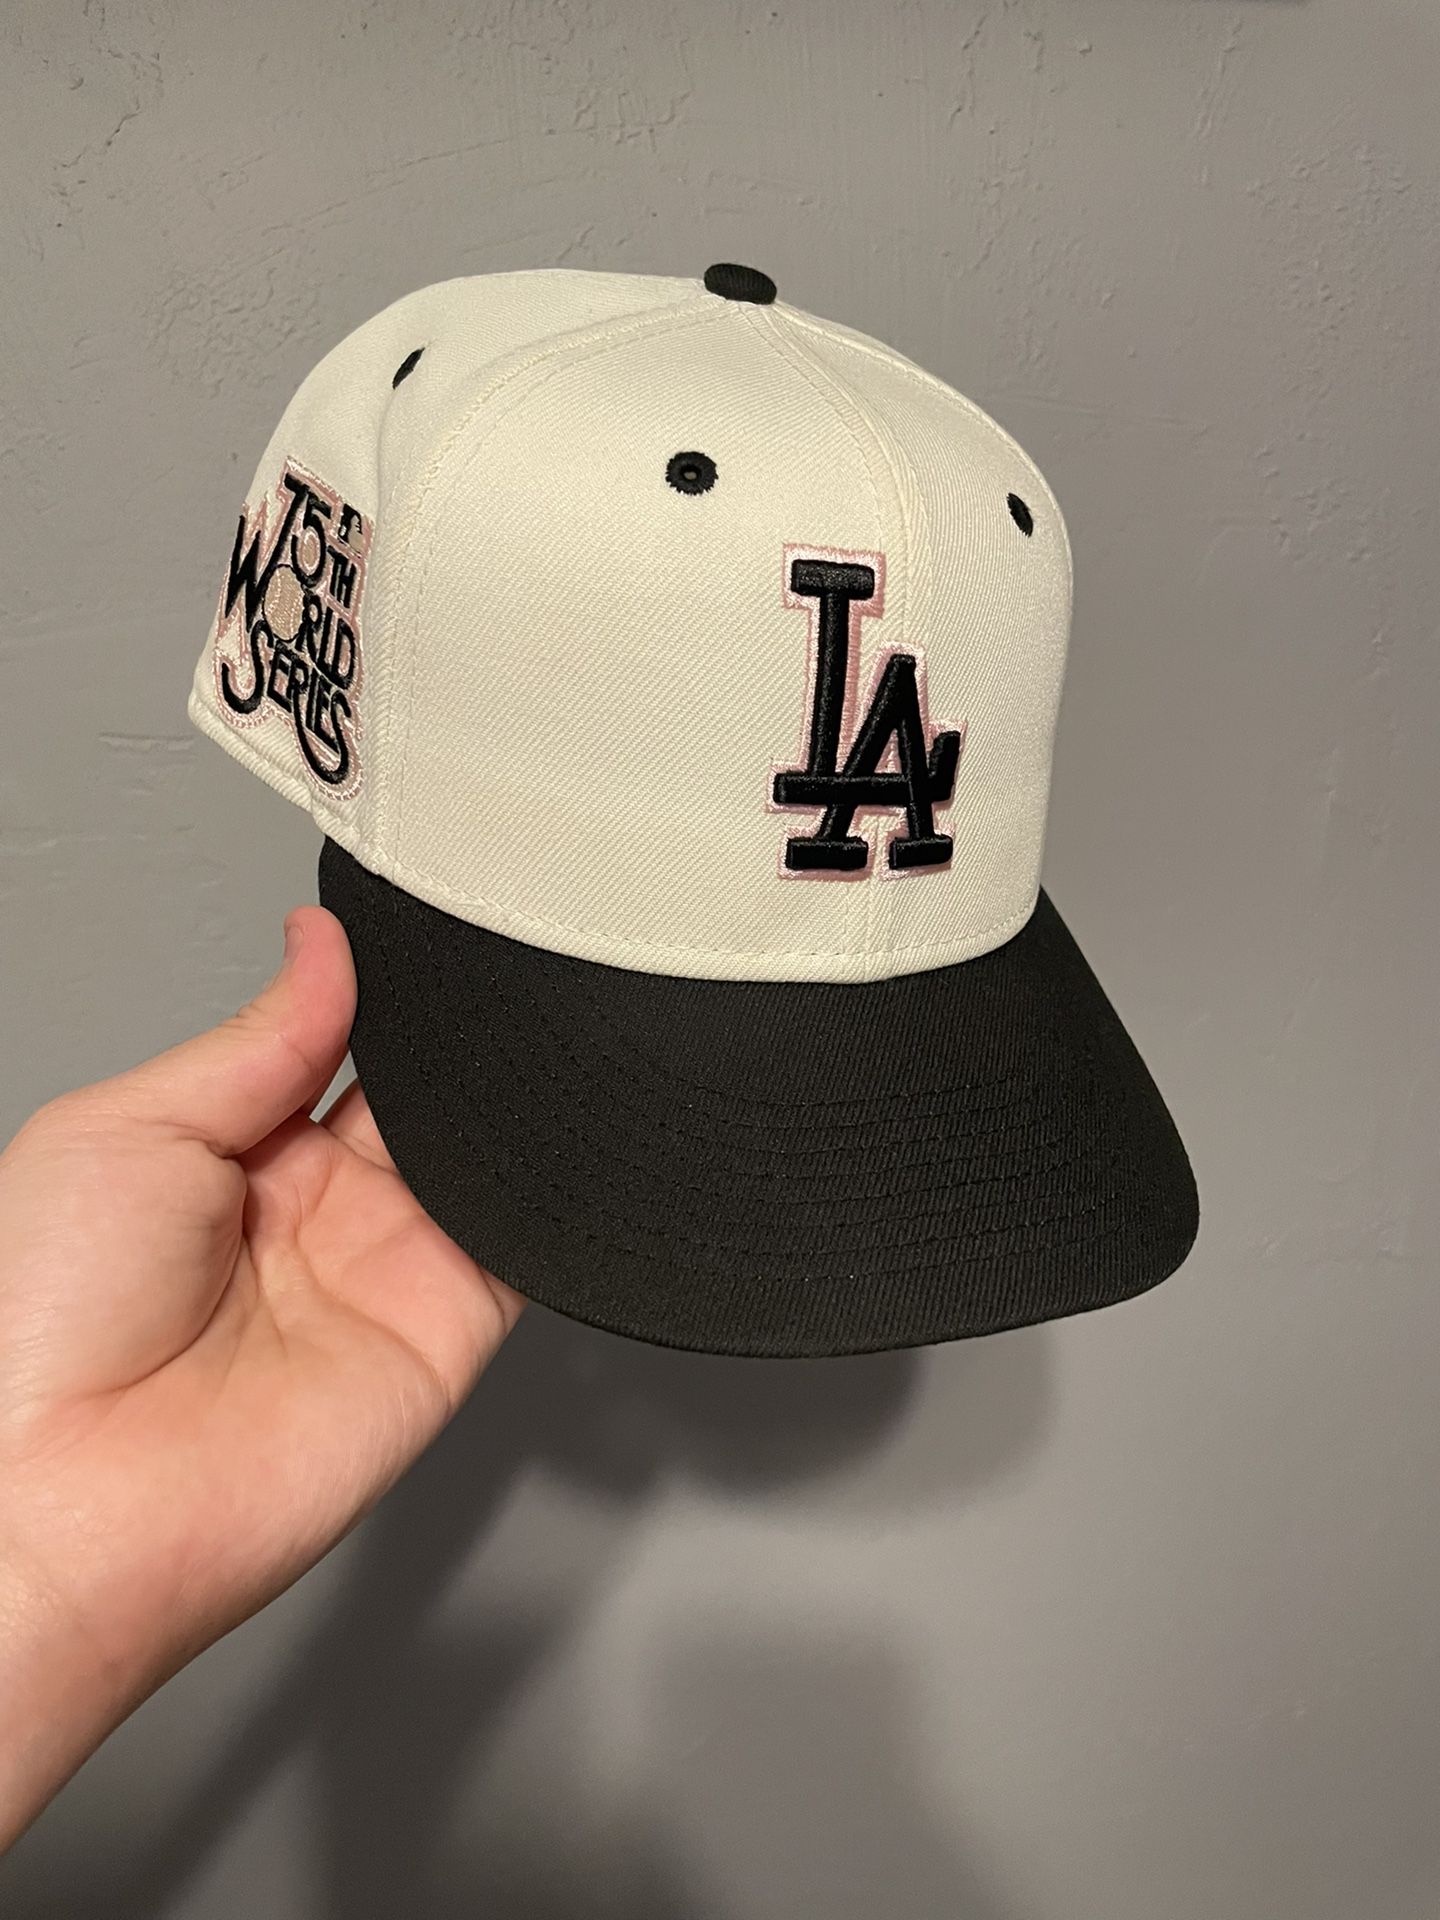 LA Dodgers Fitted Hat Size 7 (Damaged) Ripped Seam for Sale in Artesia, CA  - OfferUp